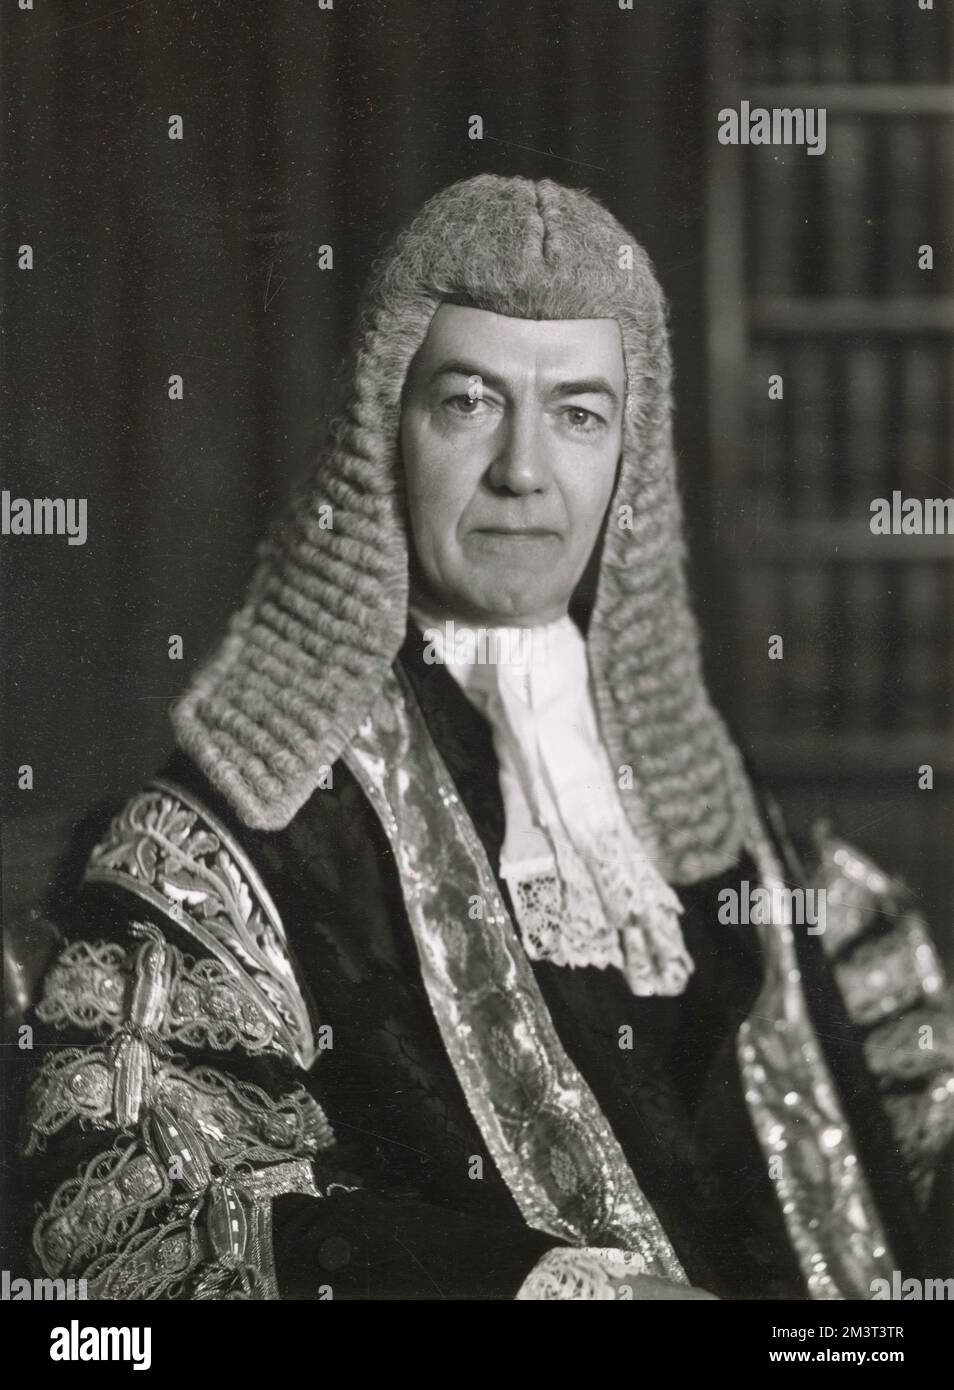 Sir Donald Somervell, Lord Justice of Appeal (1889-1960), British barrister, judge and Conservative party politician.     Date: C.1948 Stock Photo